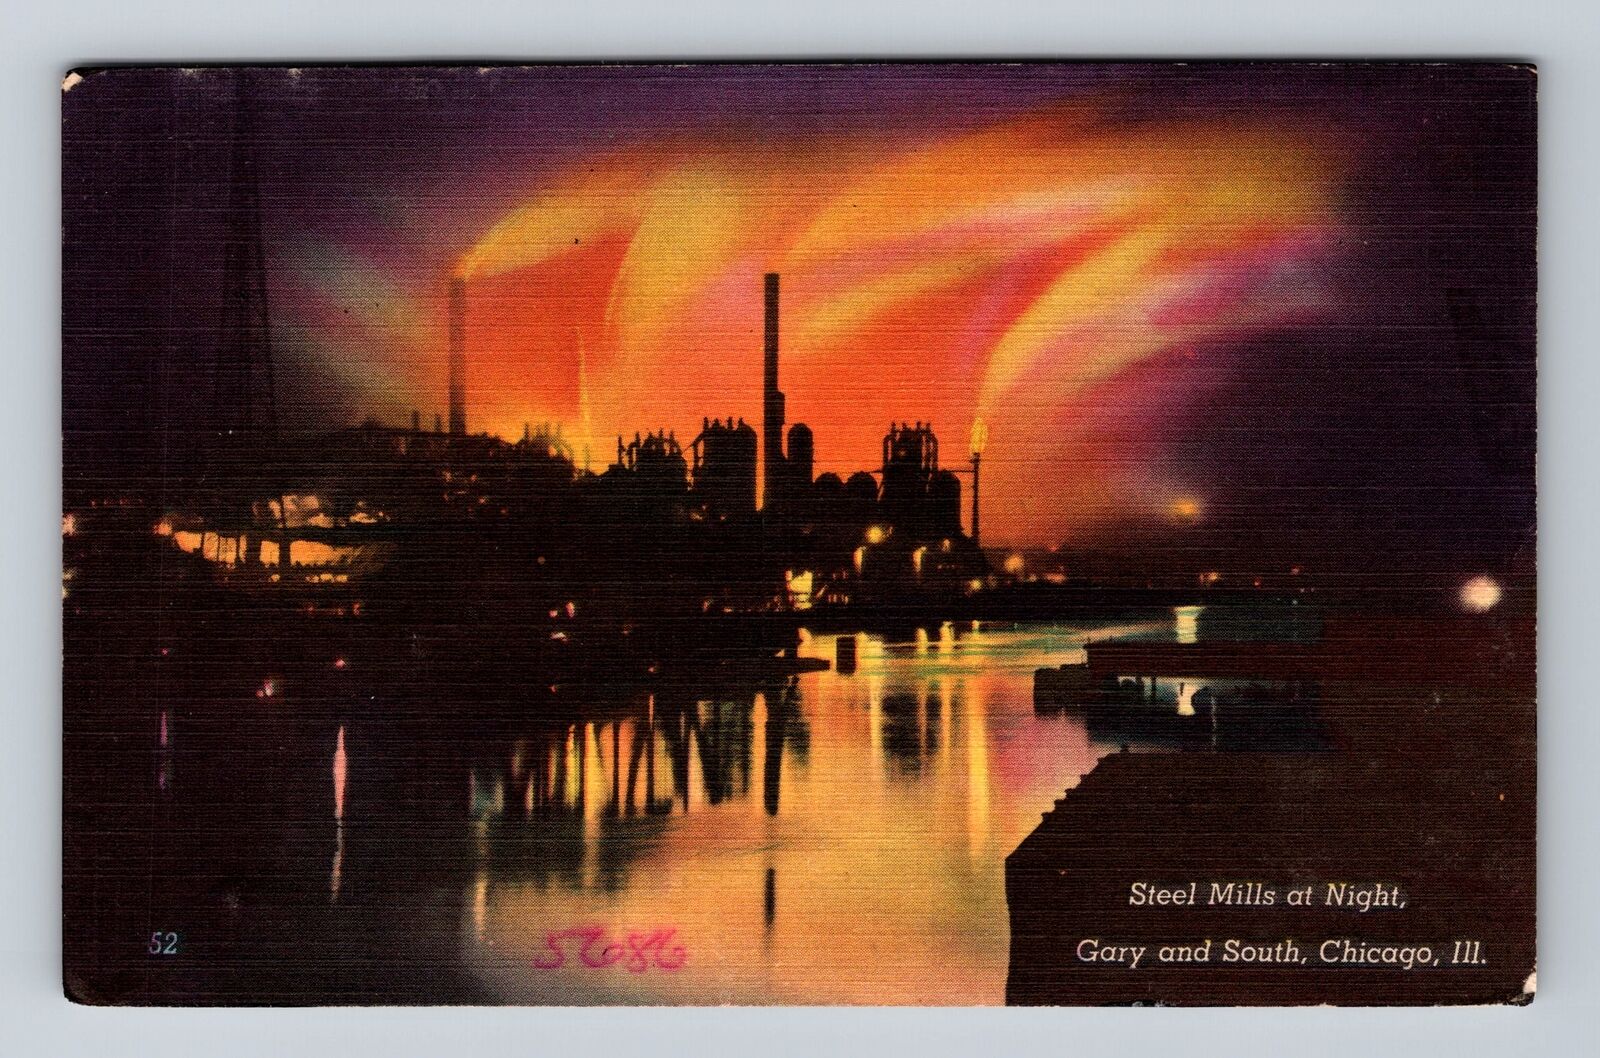 Chicago IL-Illinois, Steel Mills at Night, Gary and South, Vintage Postcard